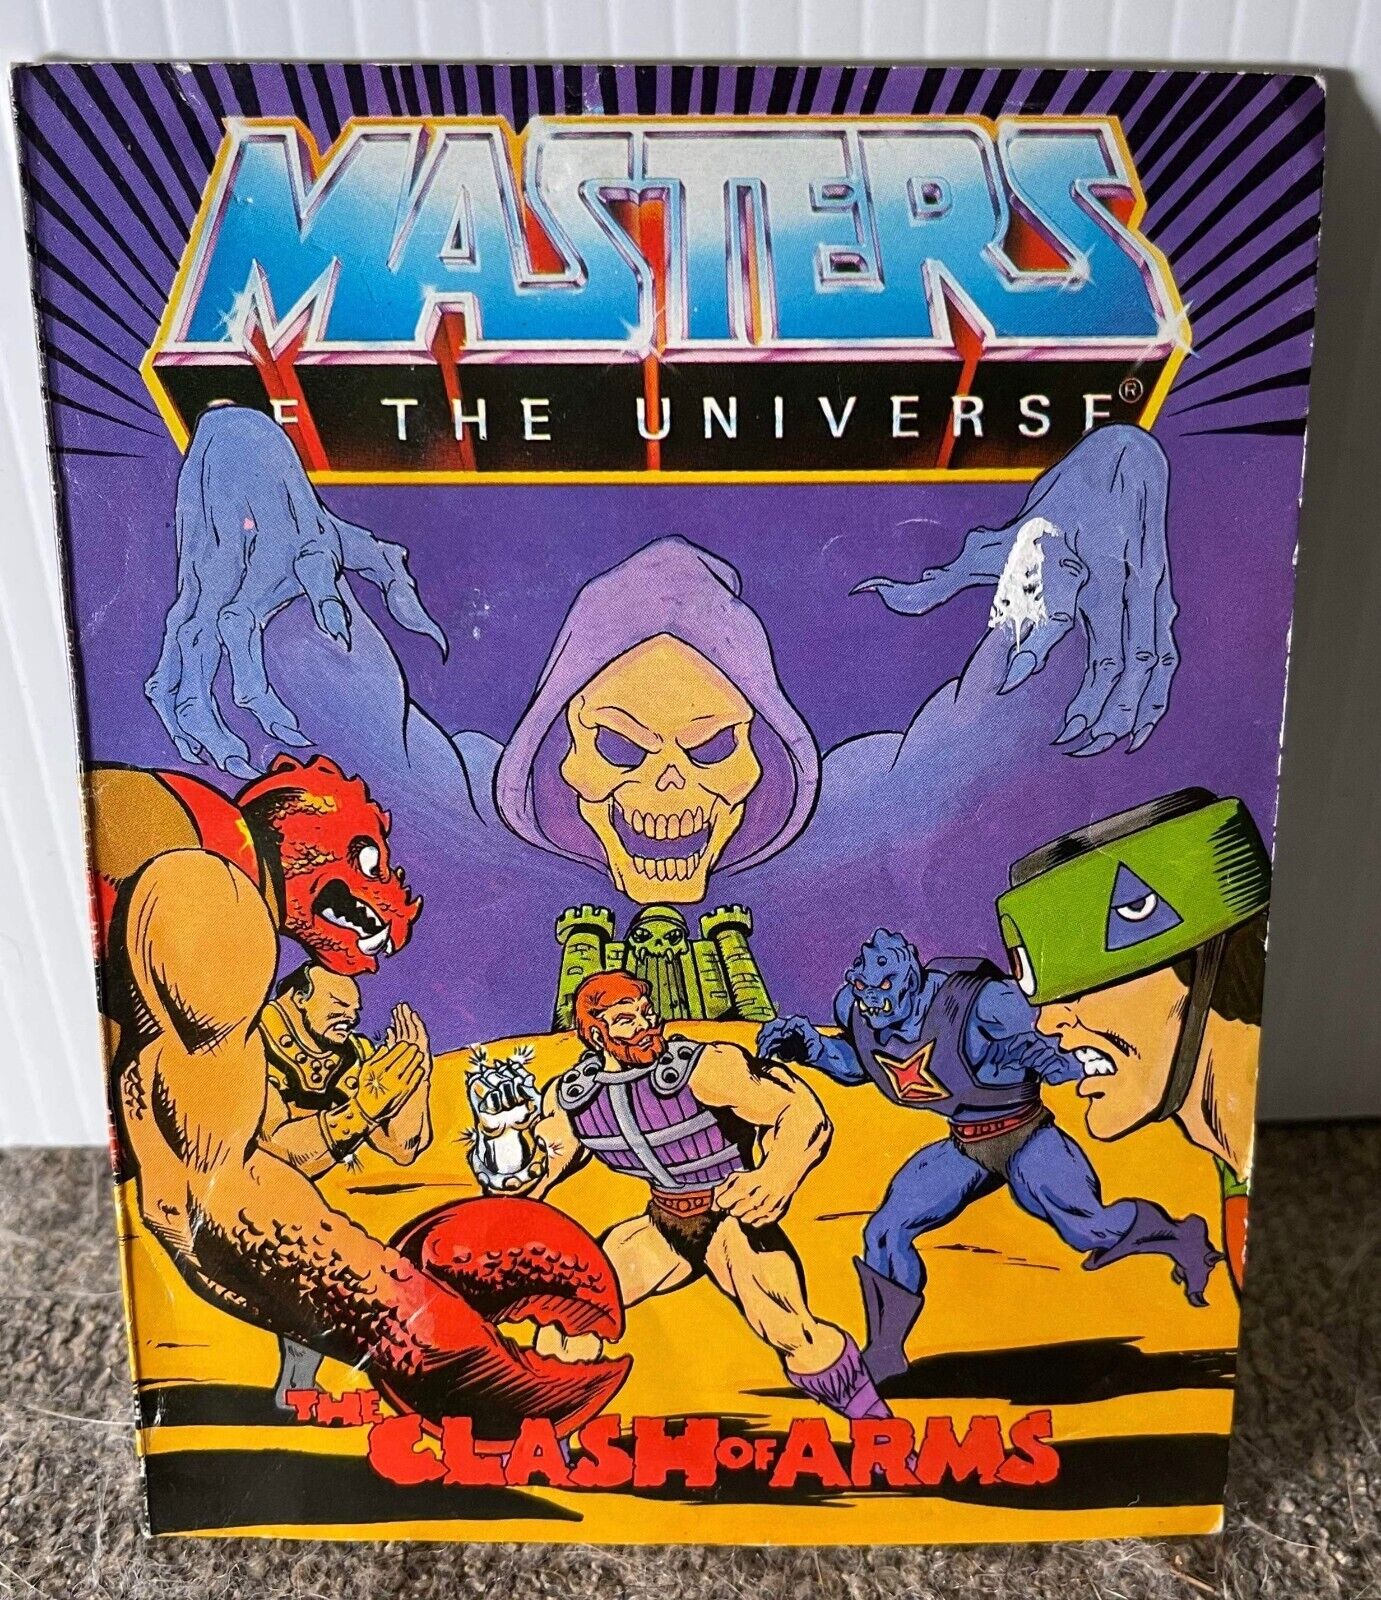 Mattel 1983 He-Man Masters of the Universe Clash of Arms Mini Comic